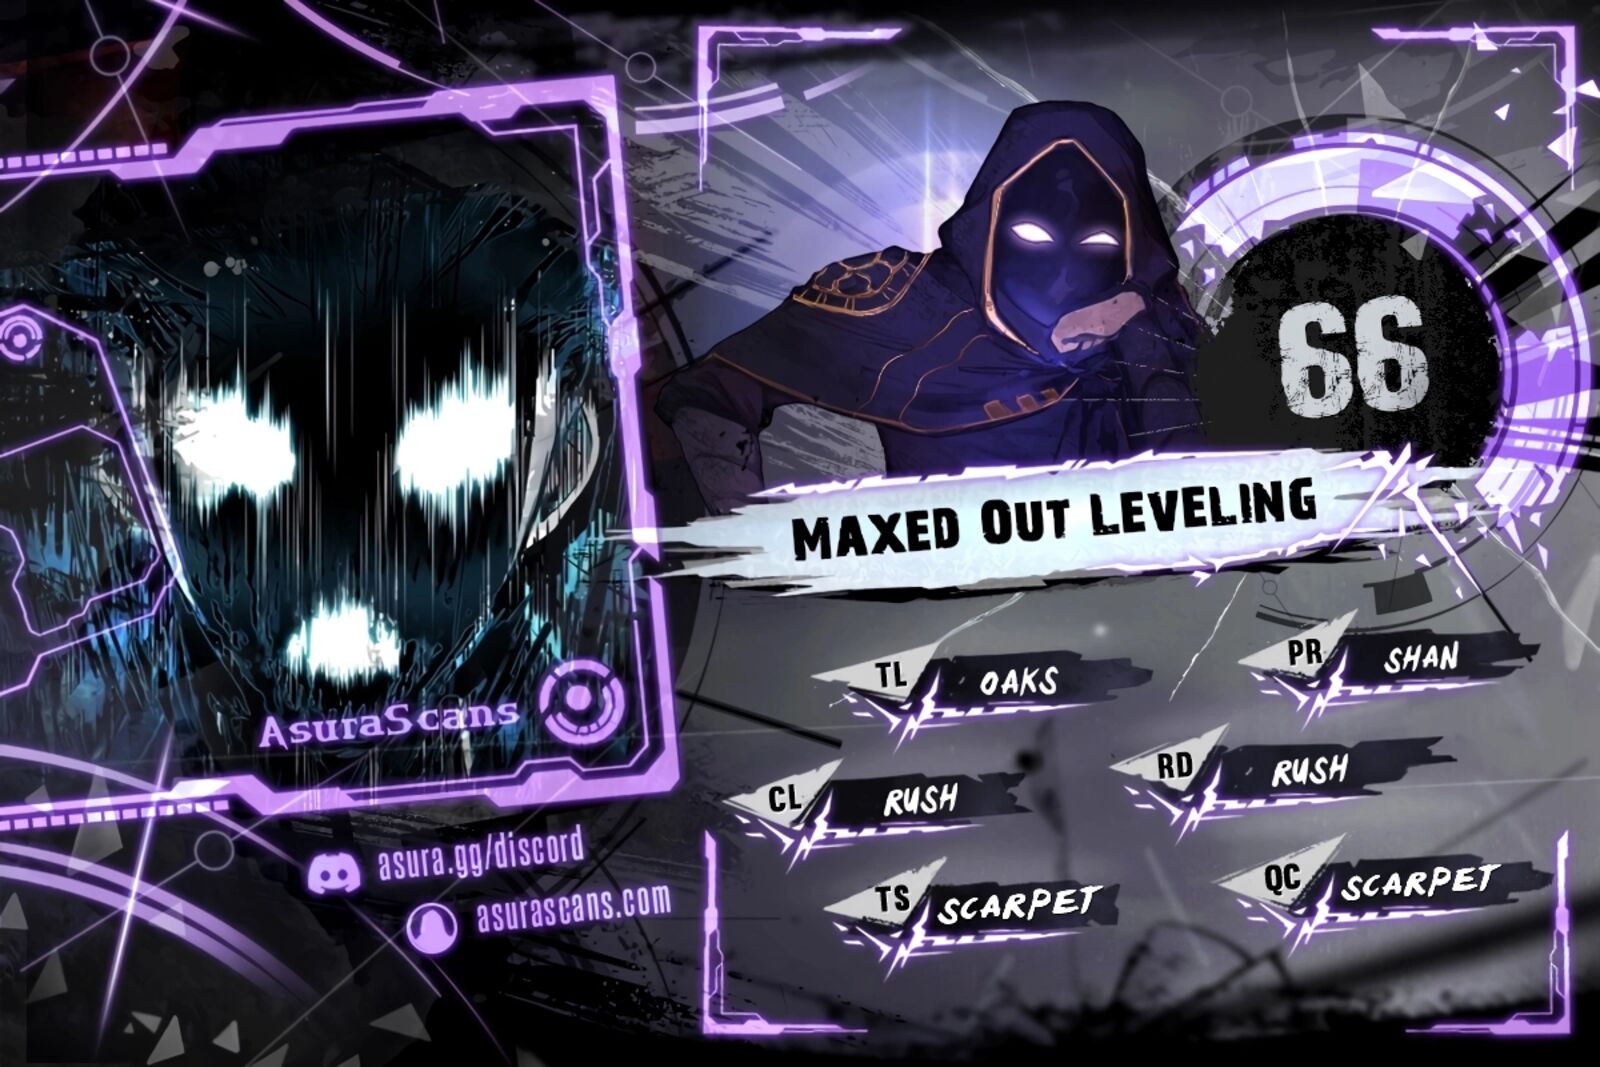 Maxed Out Leveling 66 1